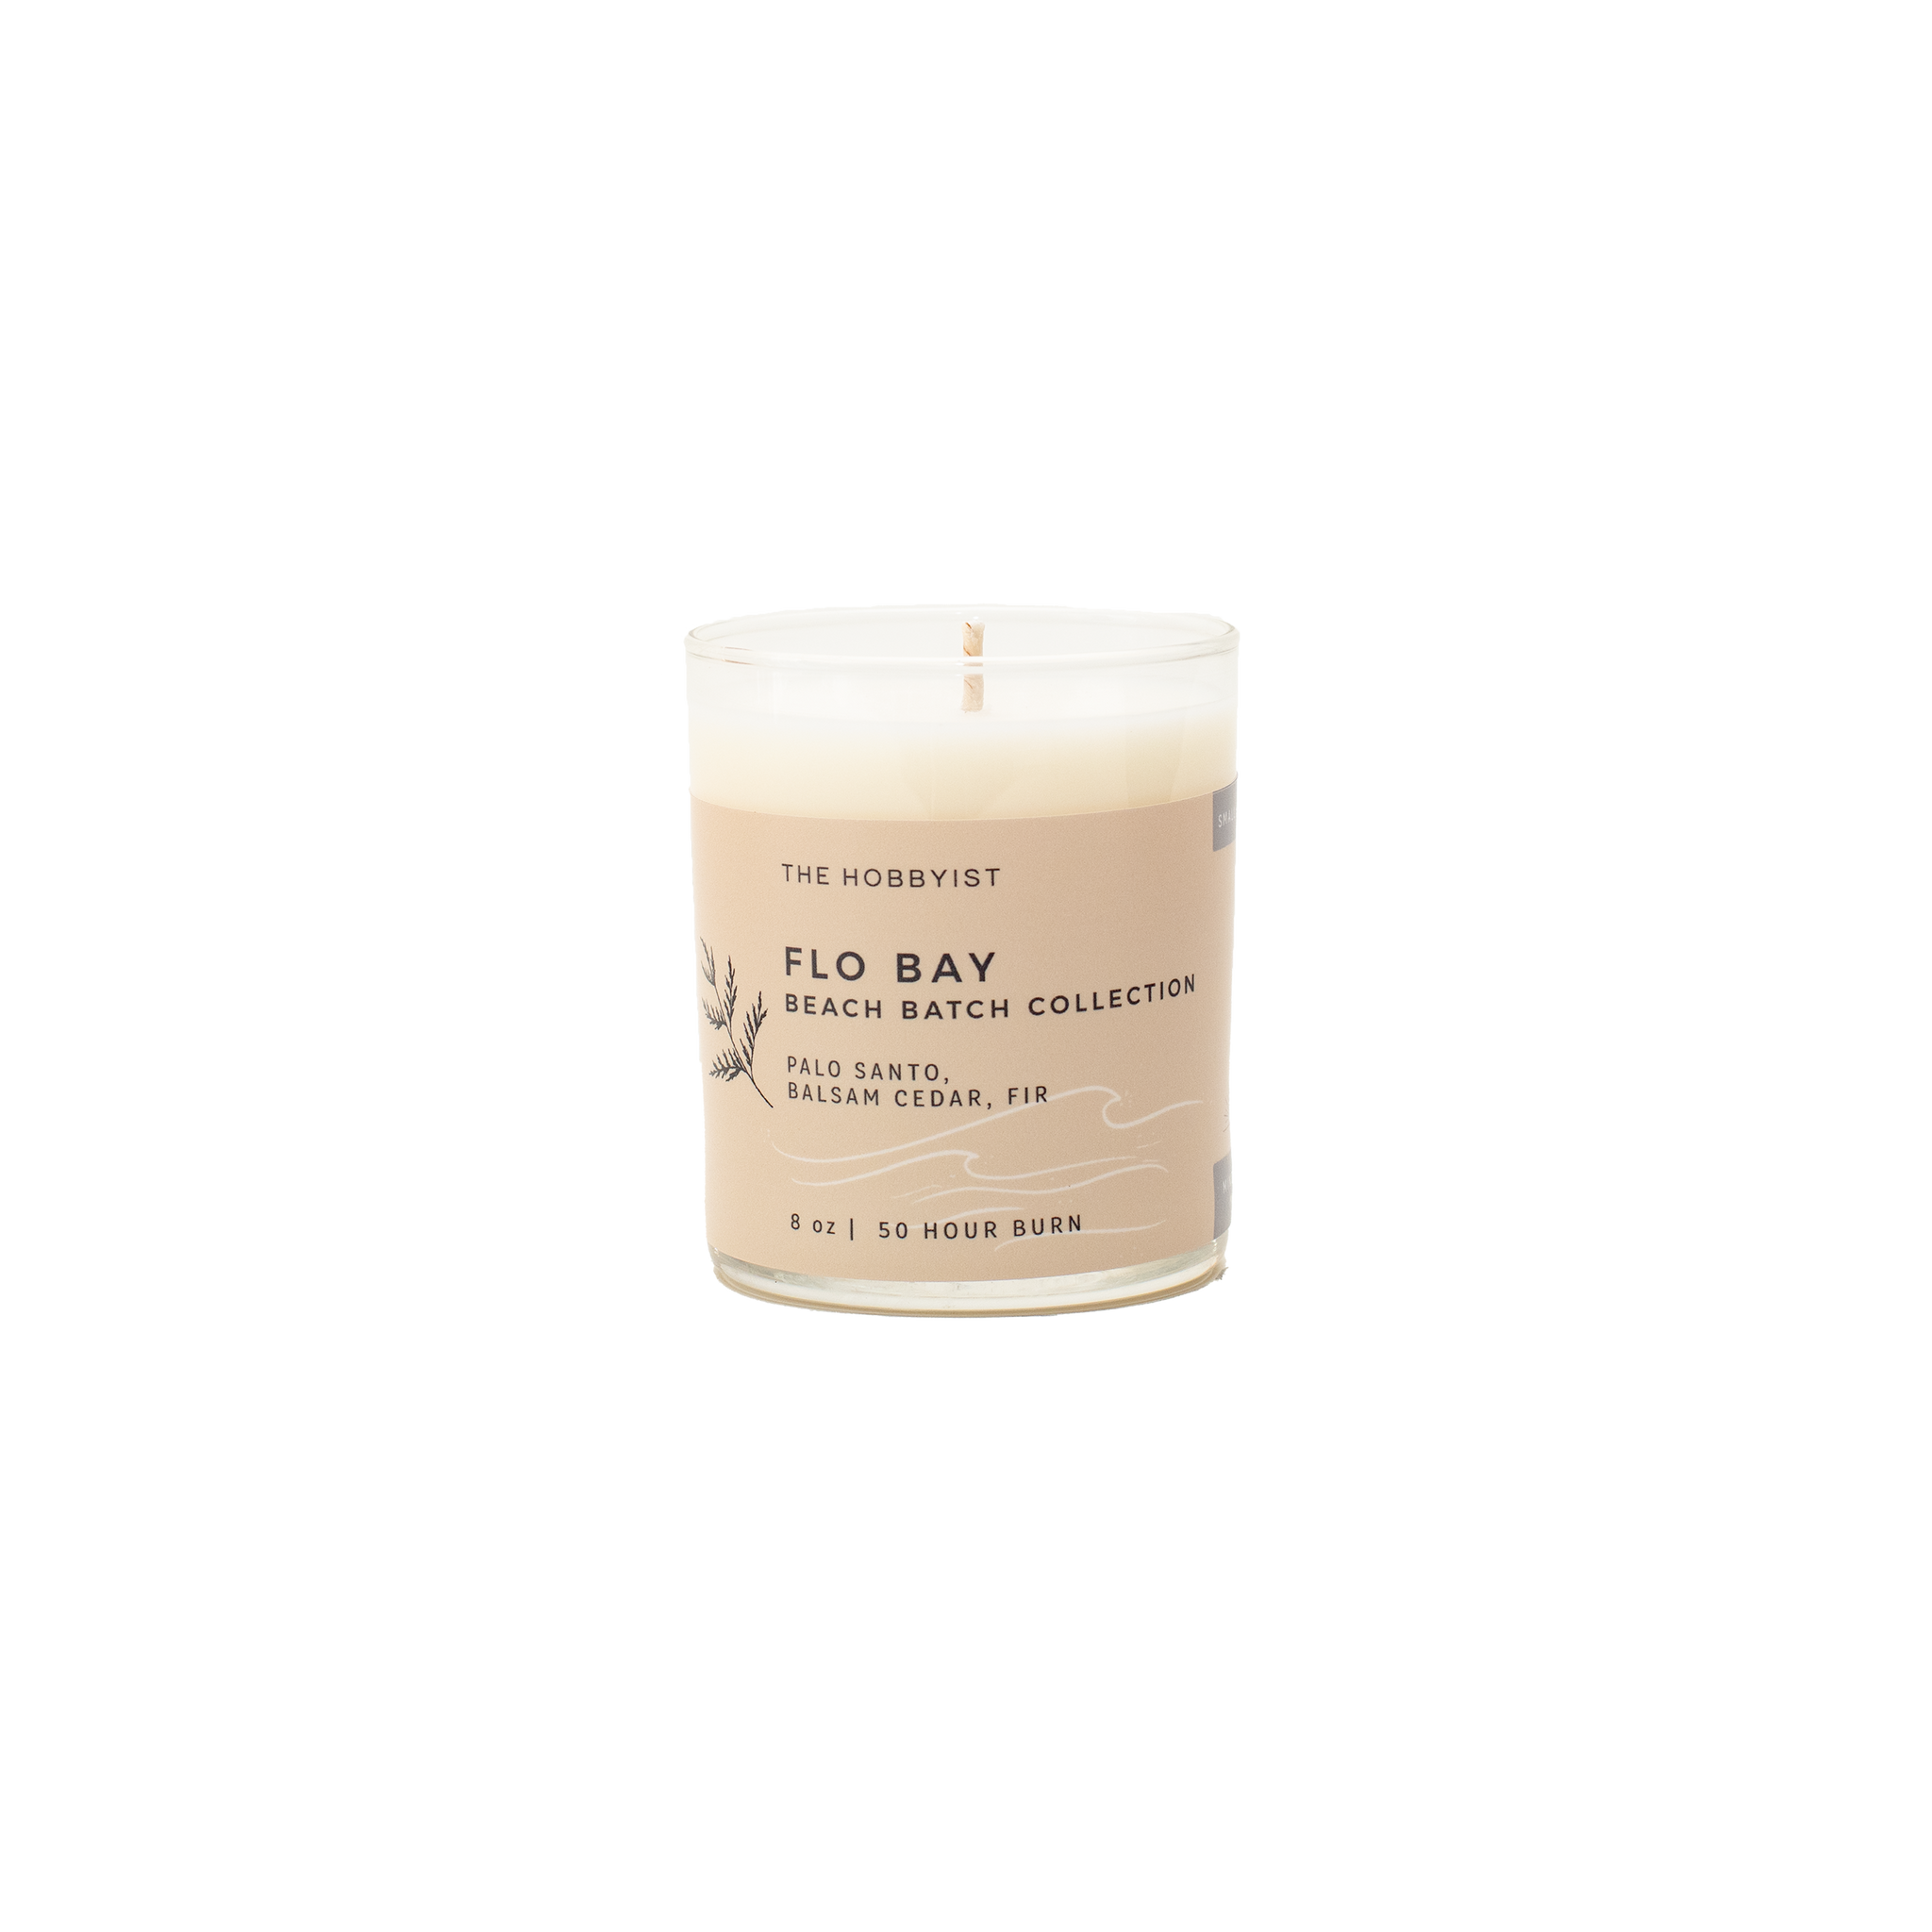 Product photo of the Flo Bay Candle from our Beach Batch Collection